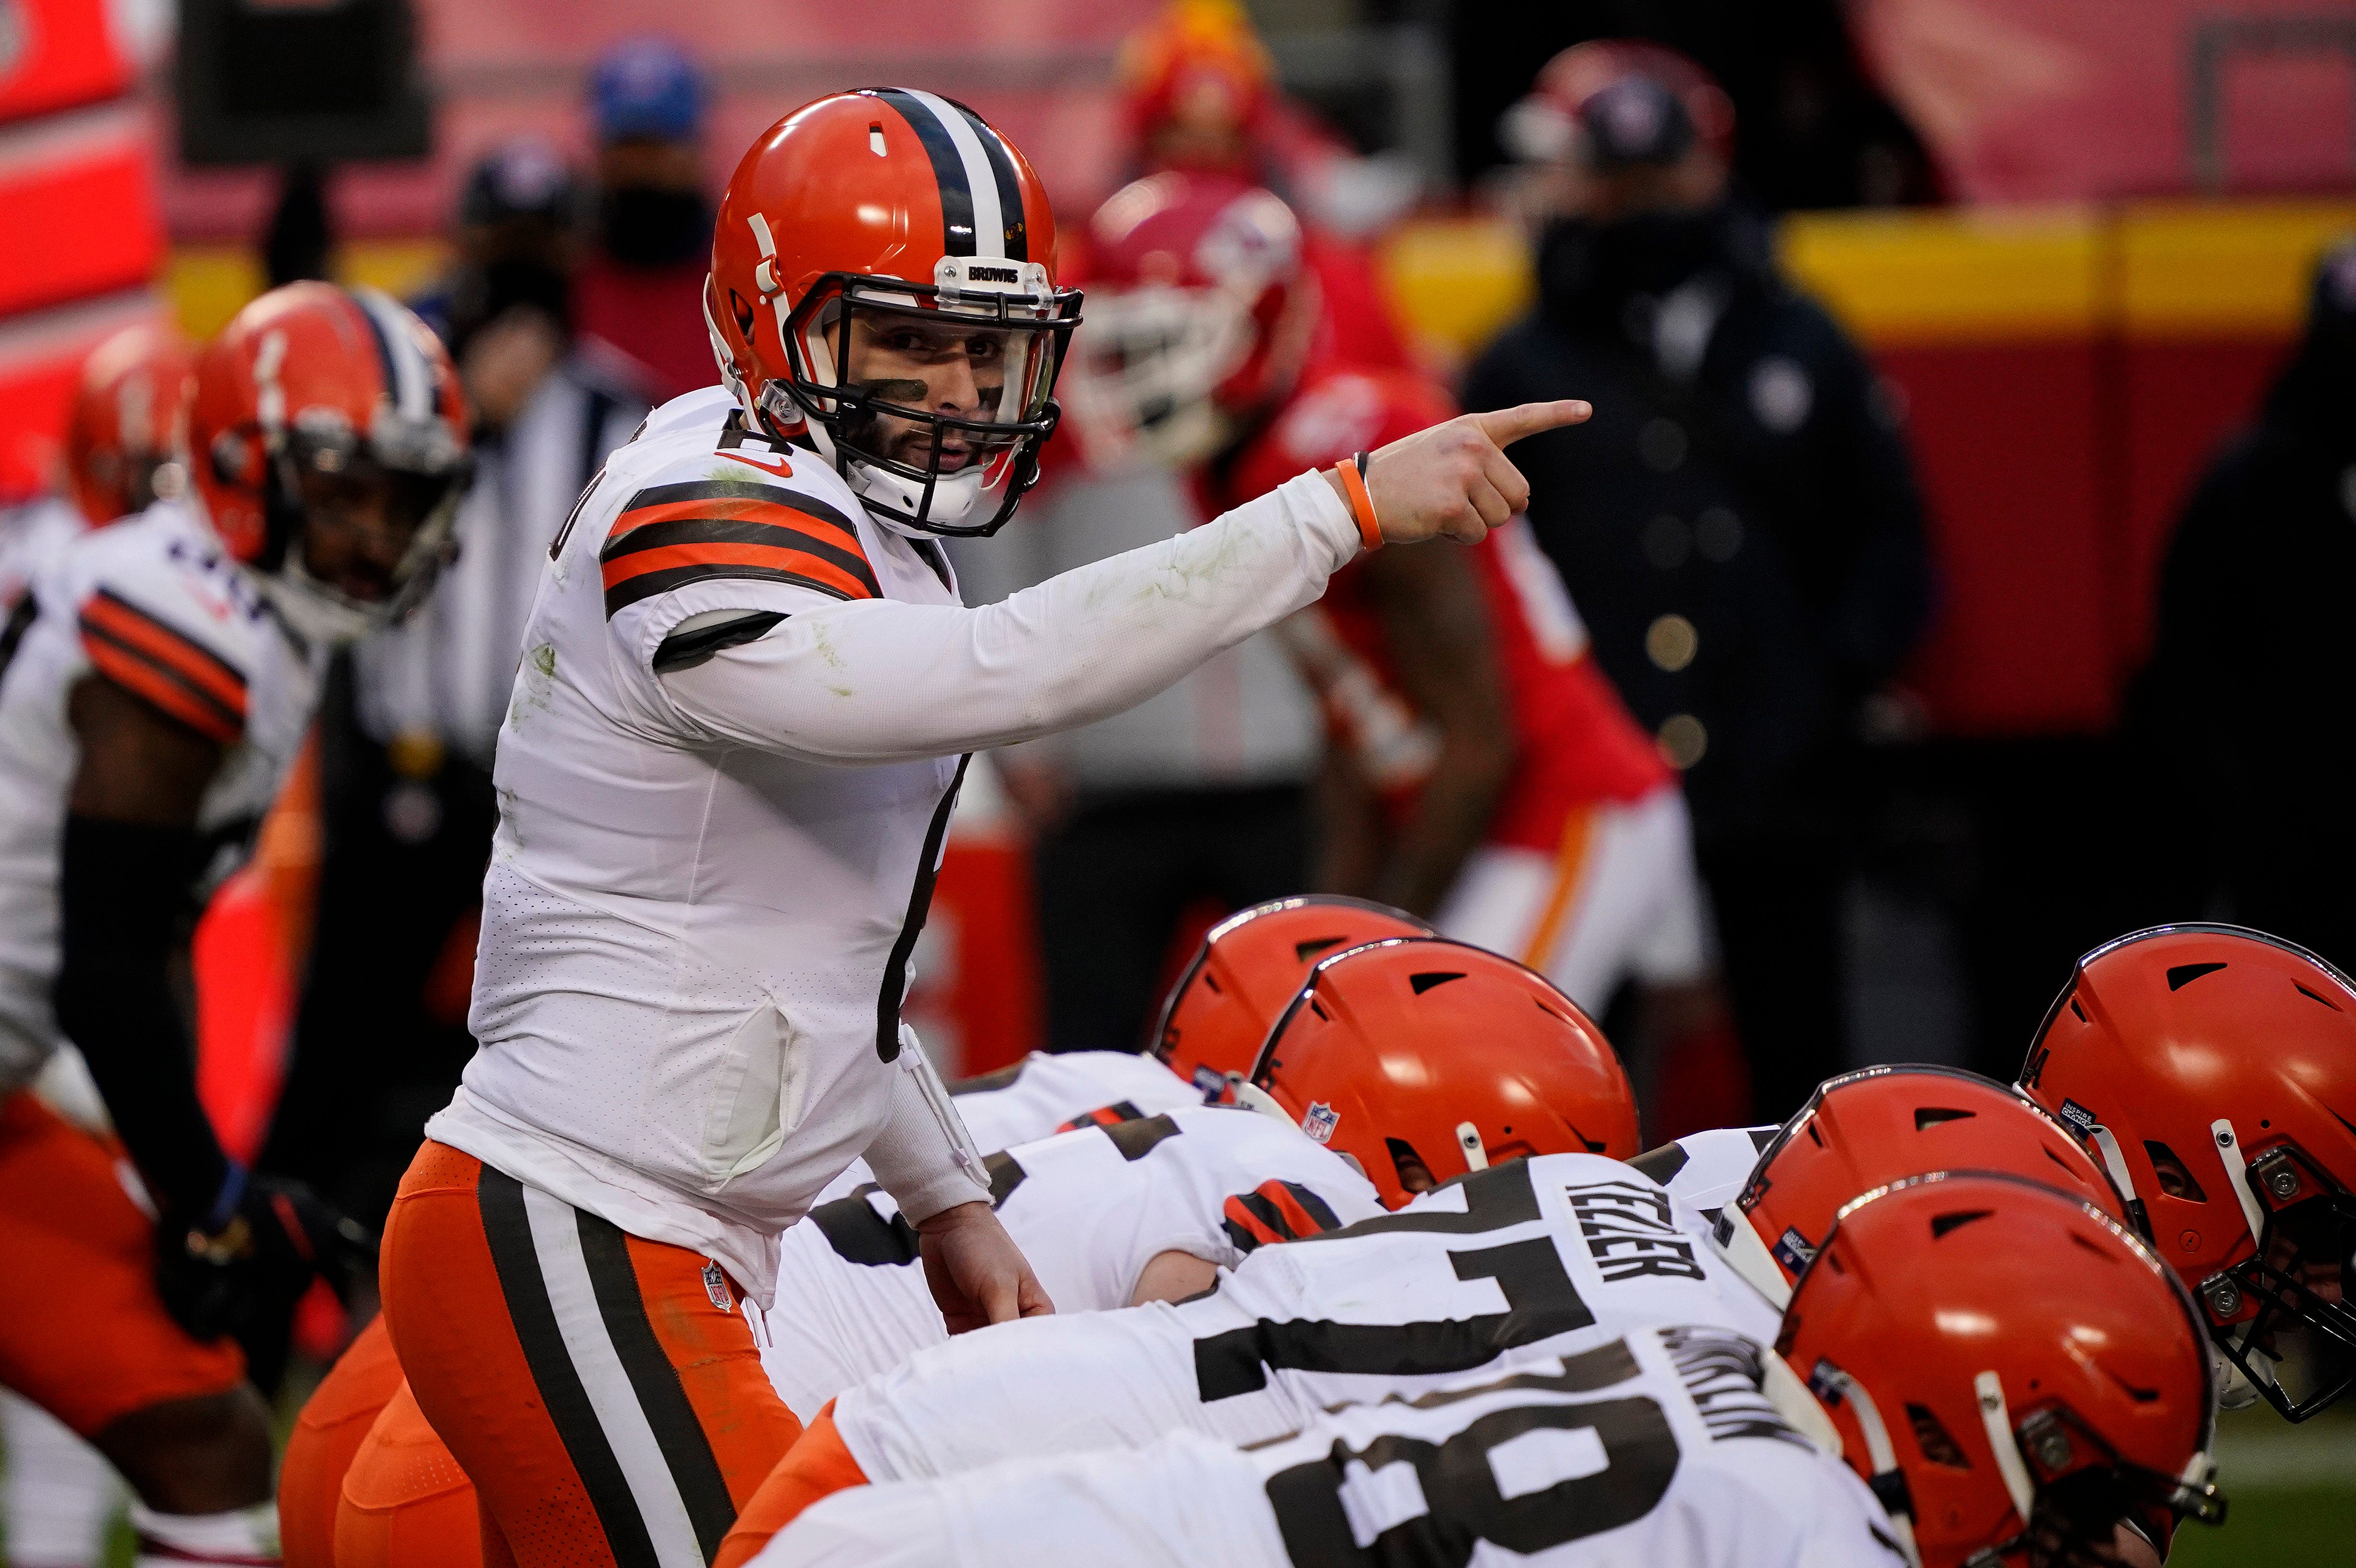 63c78671-6566-497c-9cde-bbb7d2d50461-USP_NFL__AFC_Divisional_Round-Cleveland_Browns_at Browns trade QB Baker Mayfield to Carolina Panthers